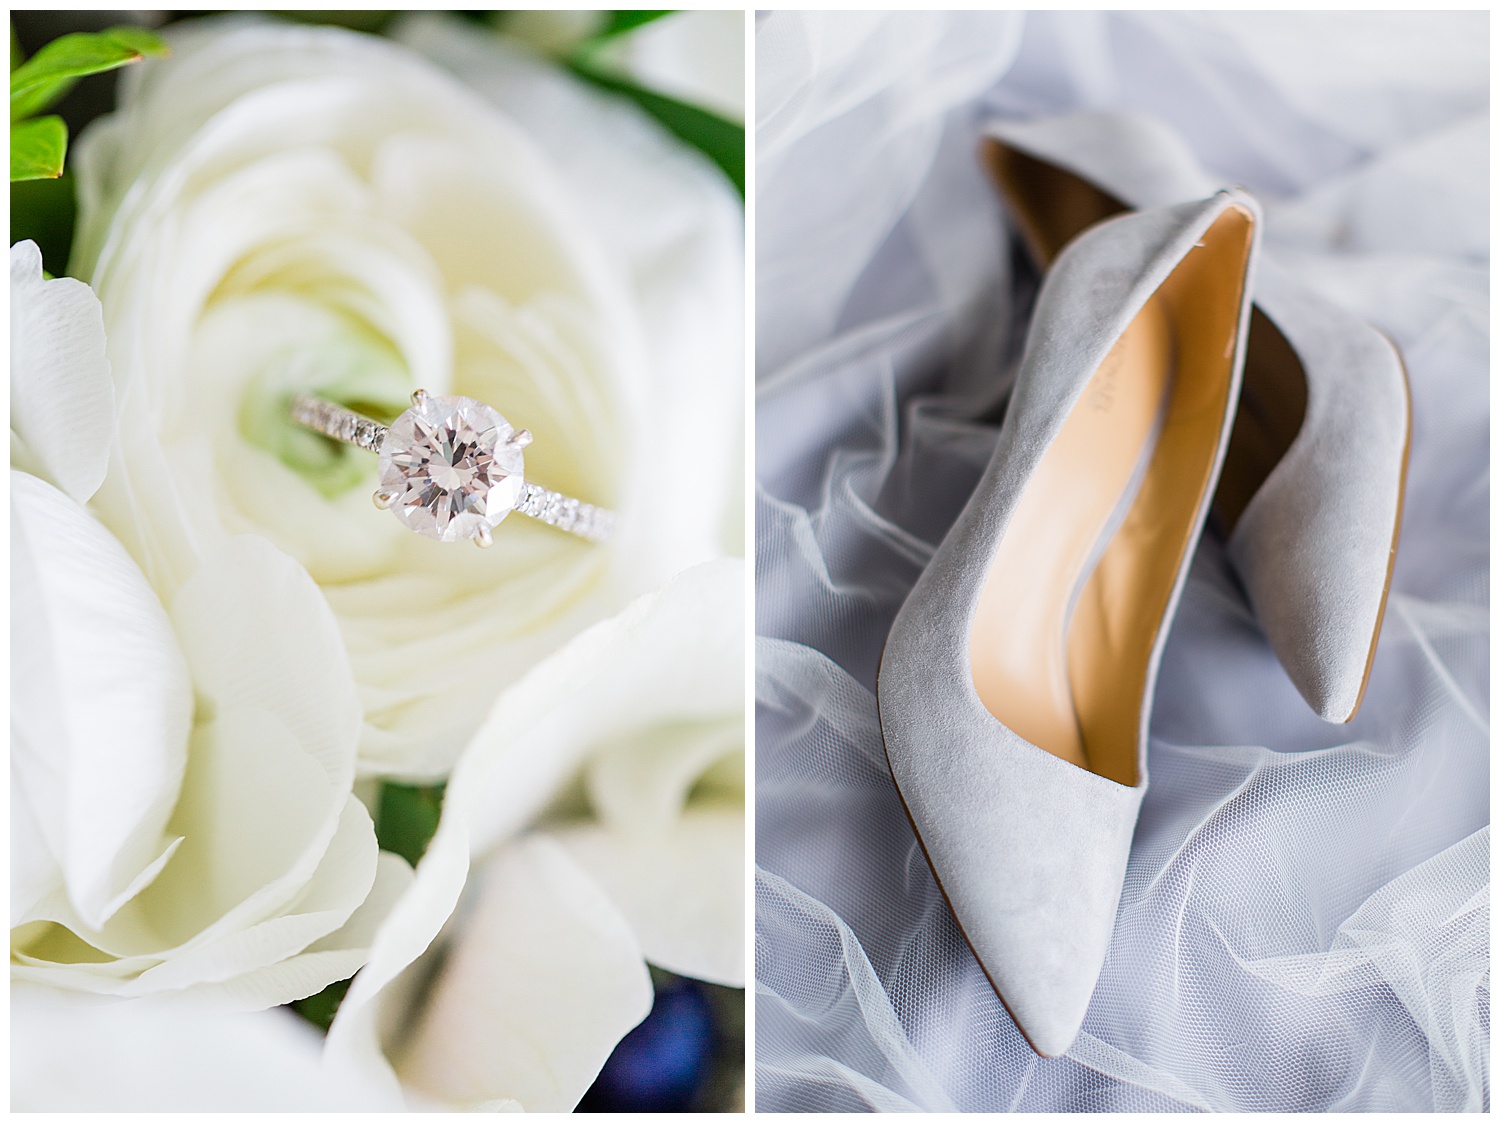 engagement ring and bride shoes on gray fabric and white veil